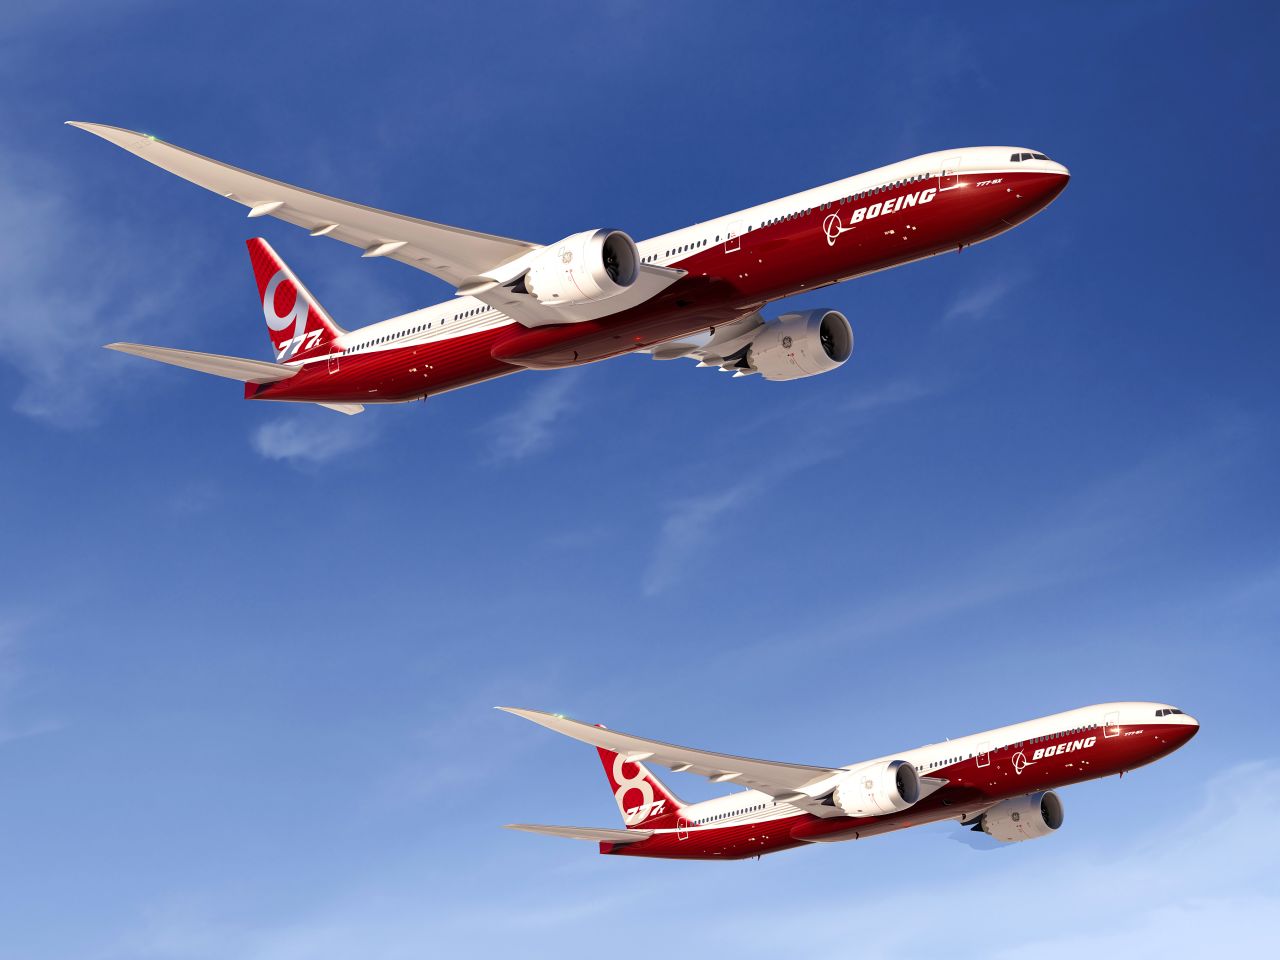 Boeing is already working on the Boeing 777X, which is meant to enter service in 2020 and will be the world's largest twin-engine jetliner.